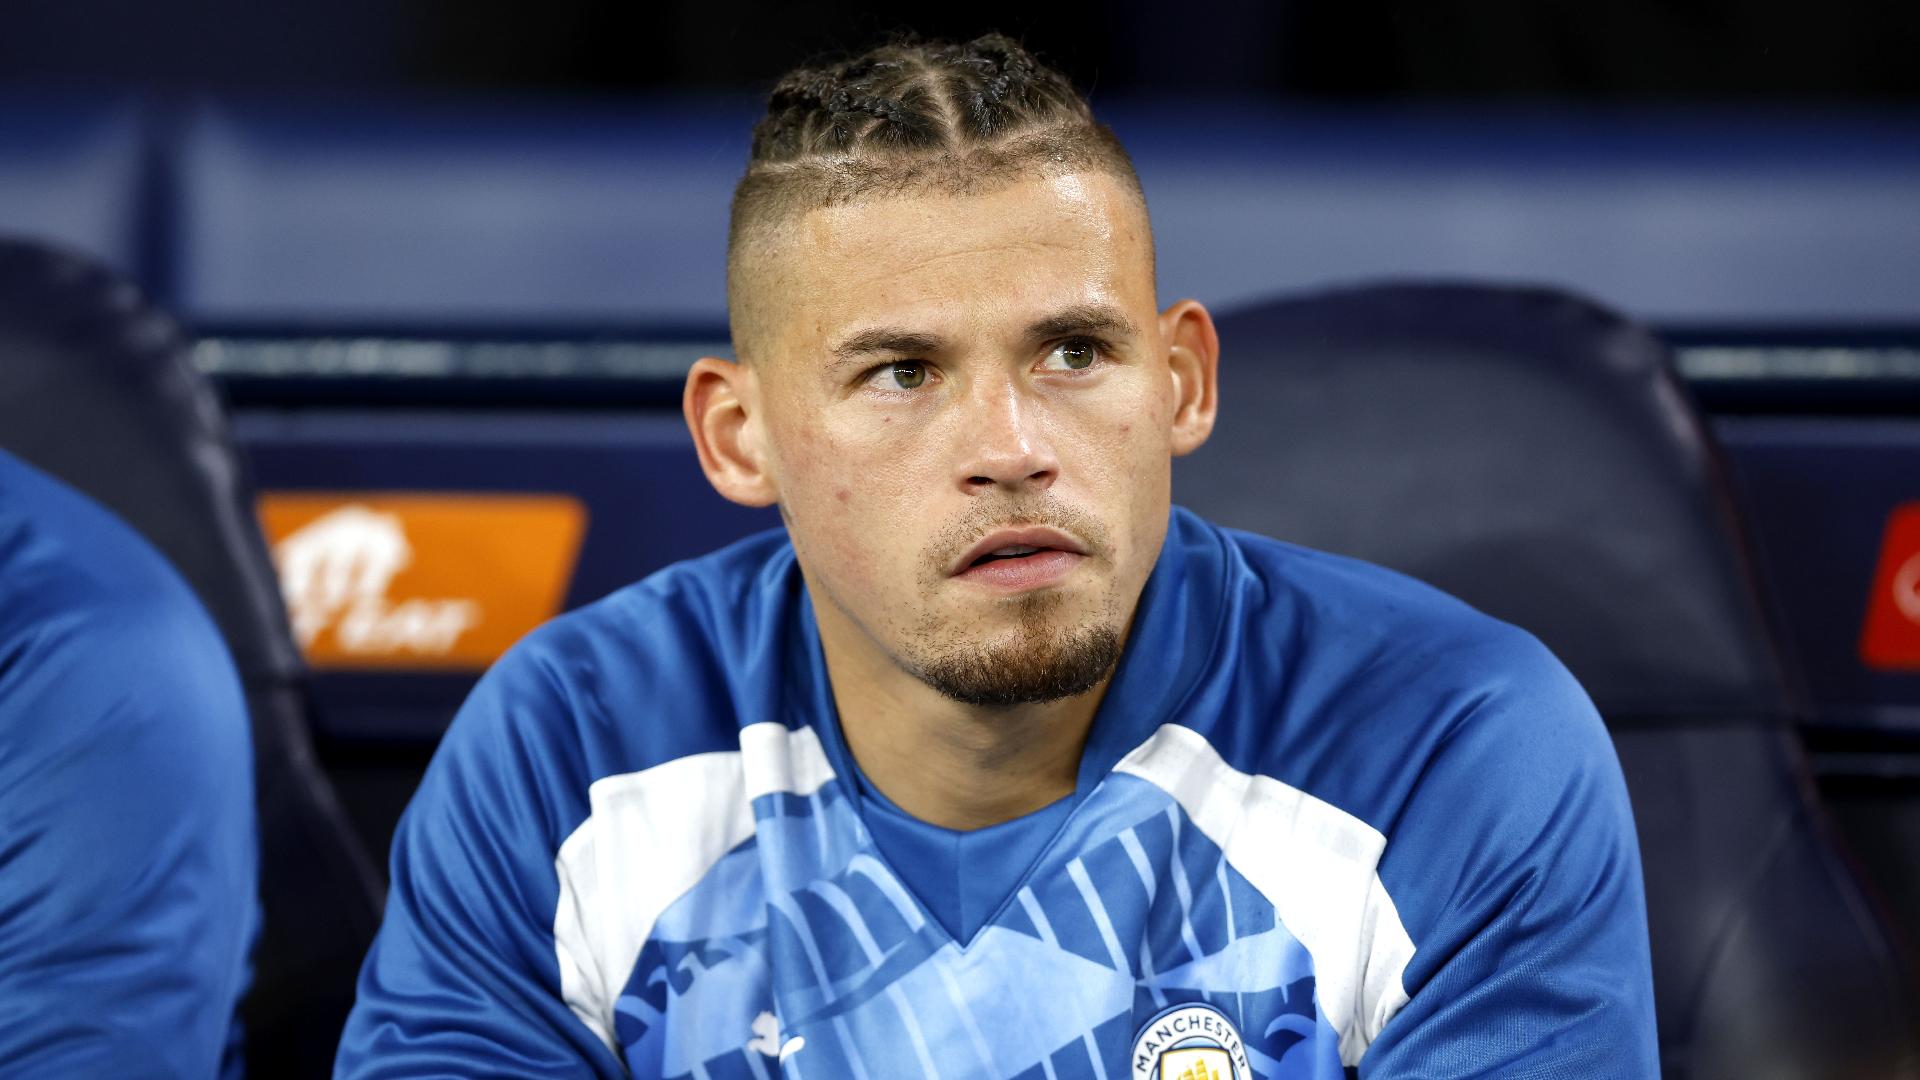 Football rumours: Bayern Munich weighing up move for Man City's Kalvin Phillips | beIN SPORTS